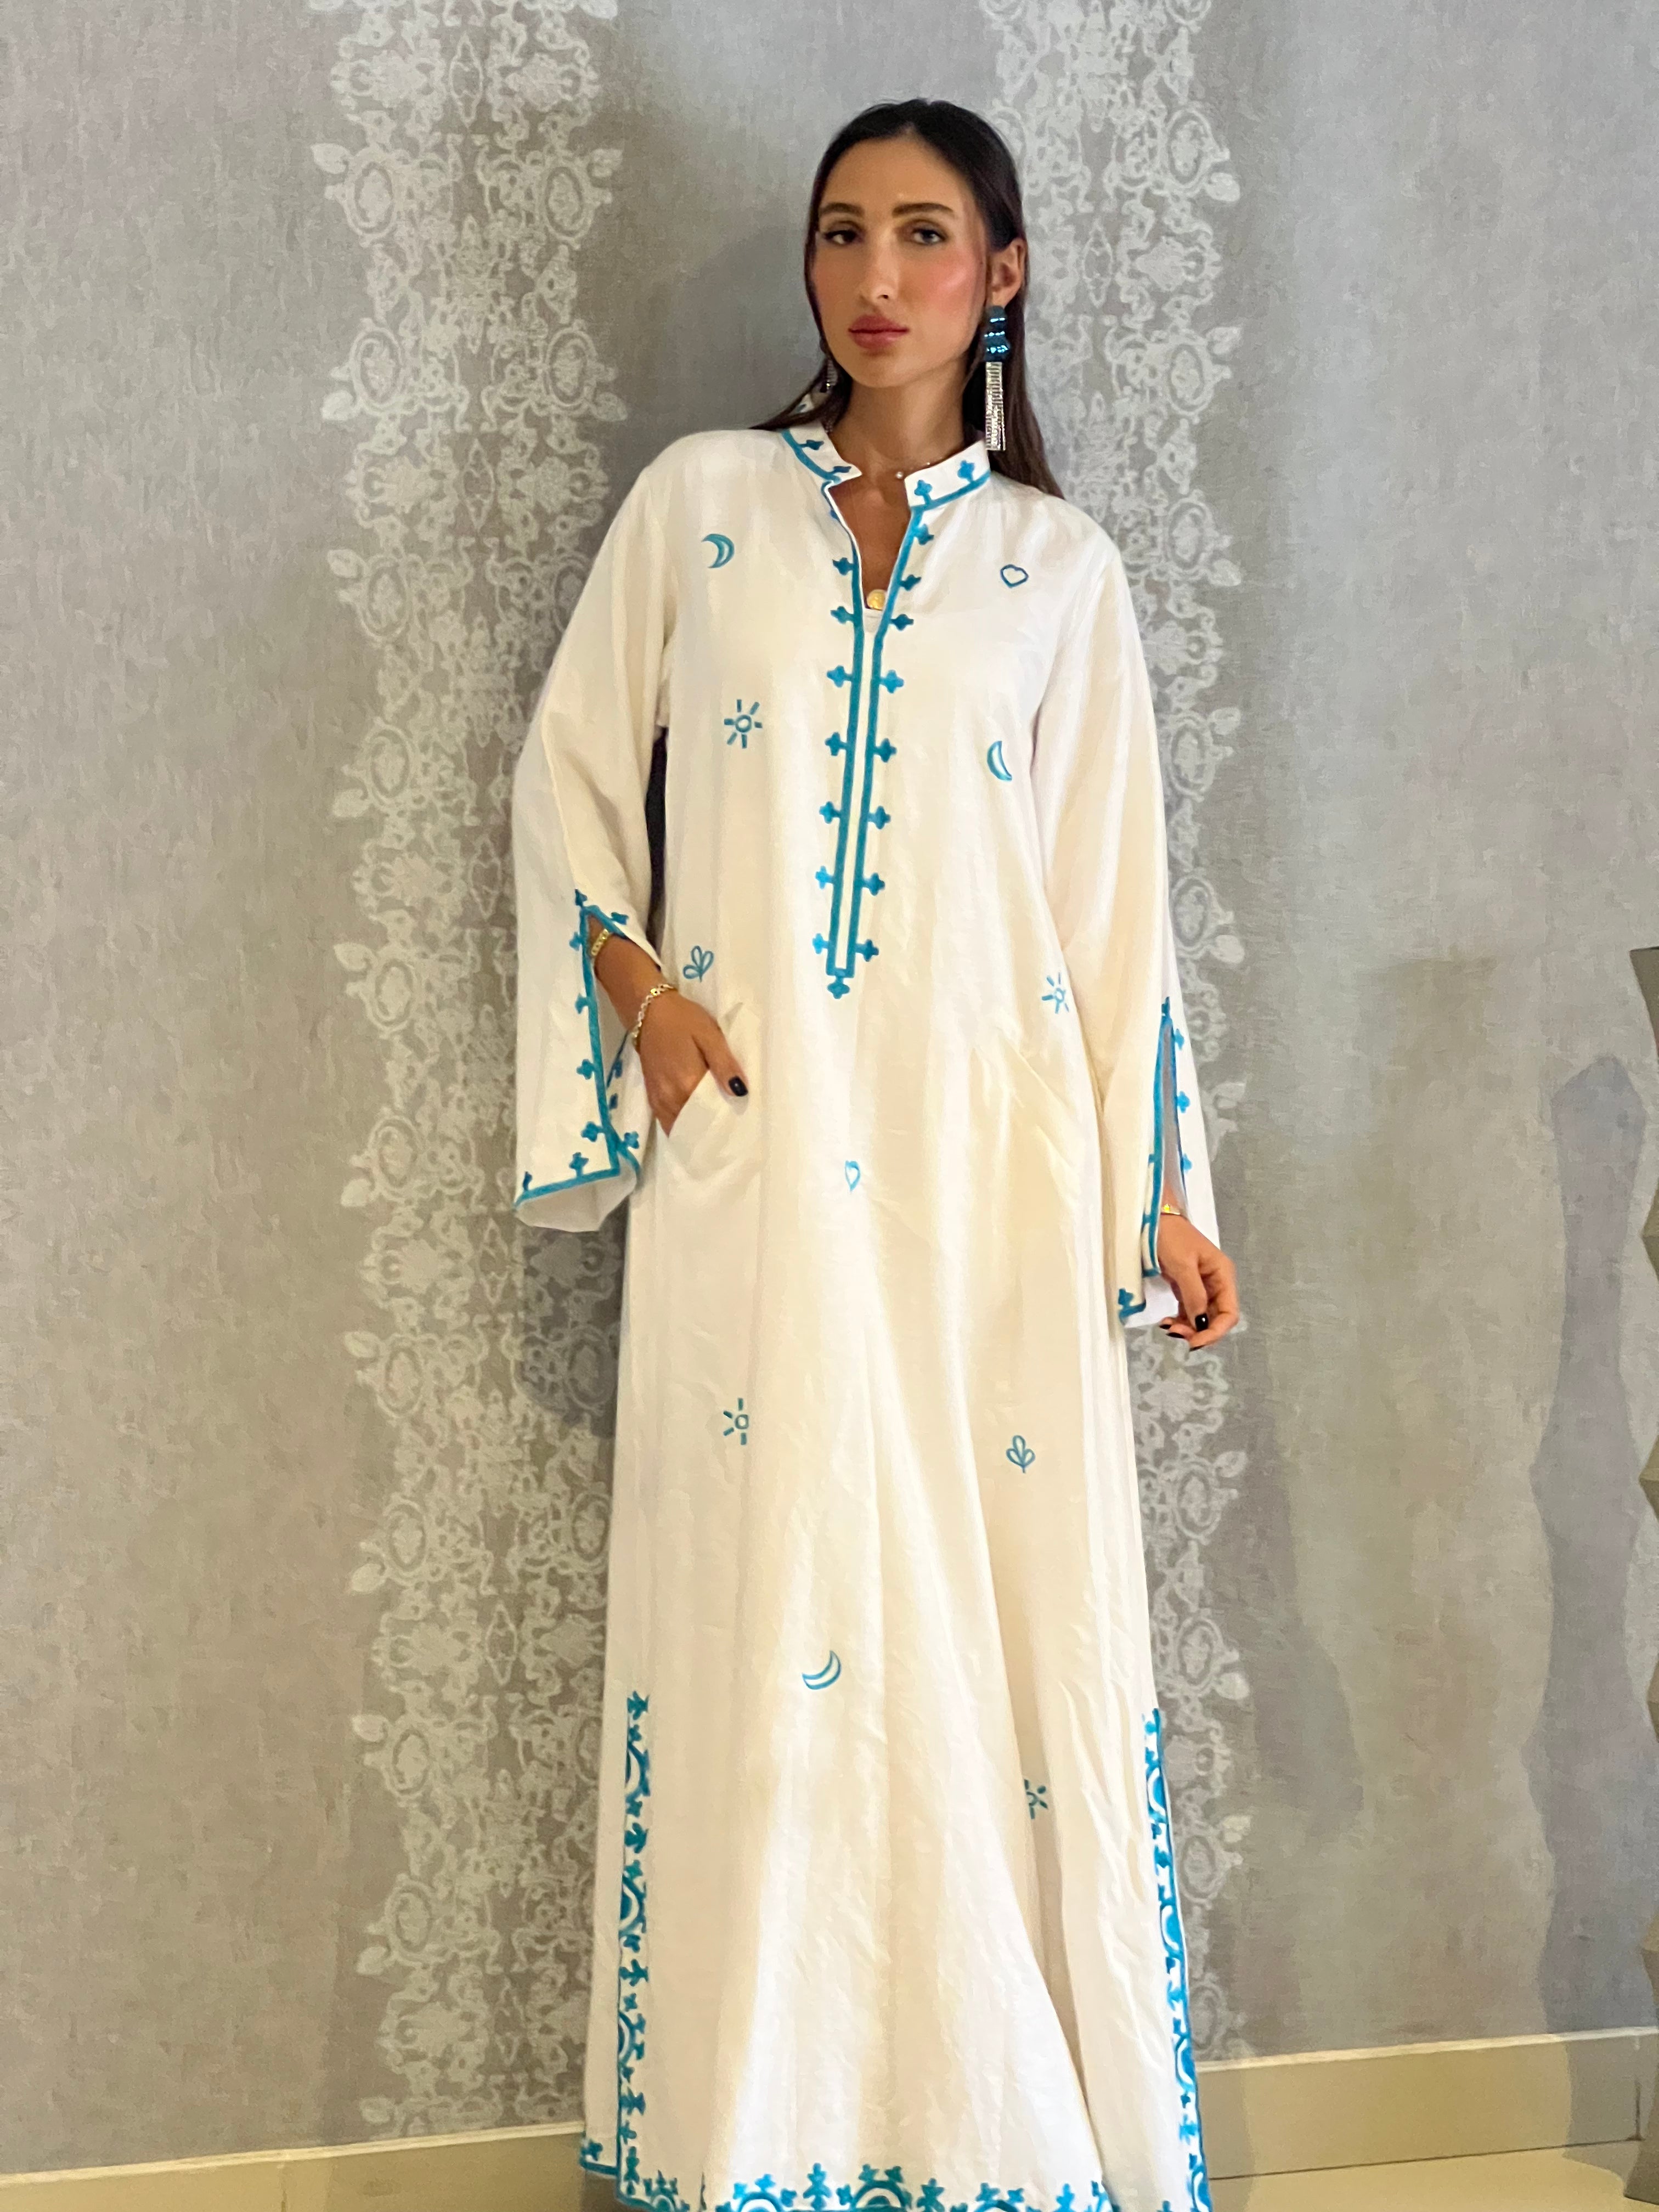 Mona from Morocco: Traditional White Abaya with Blue Embroidery